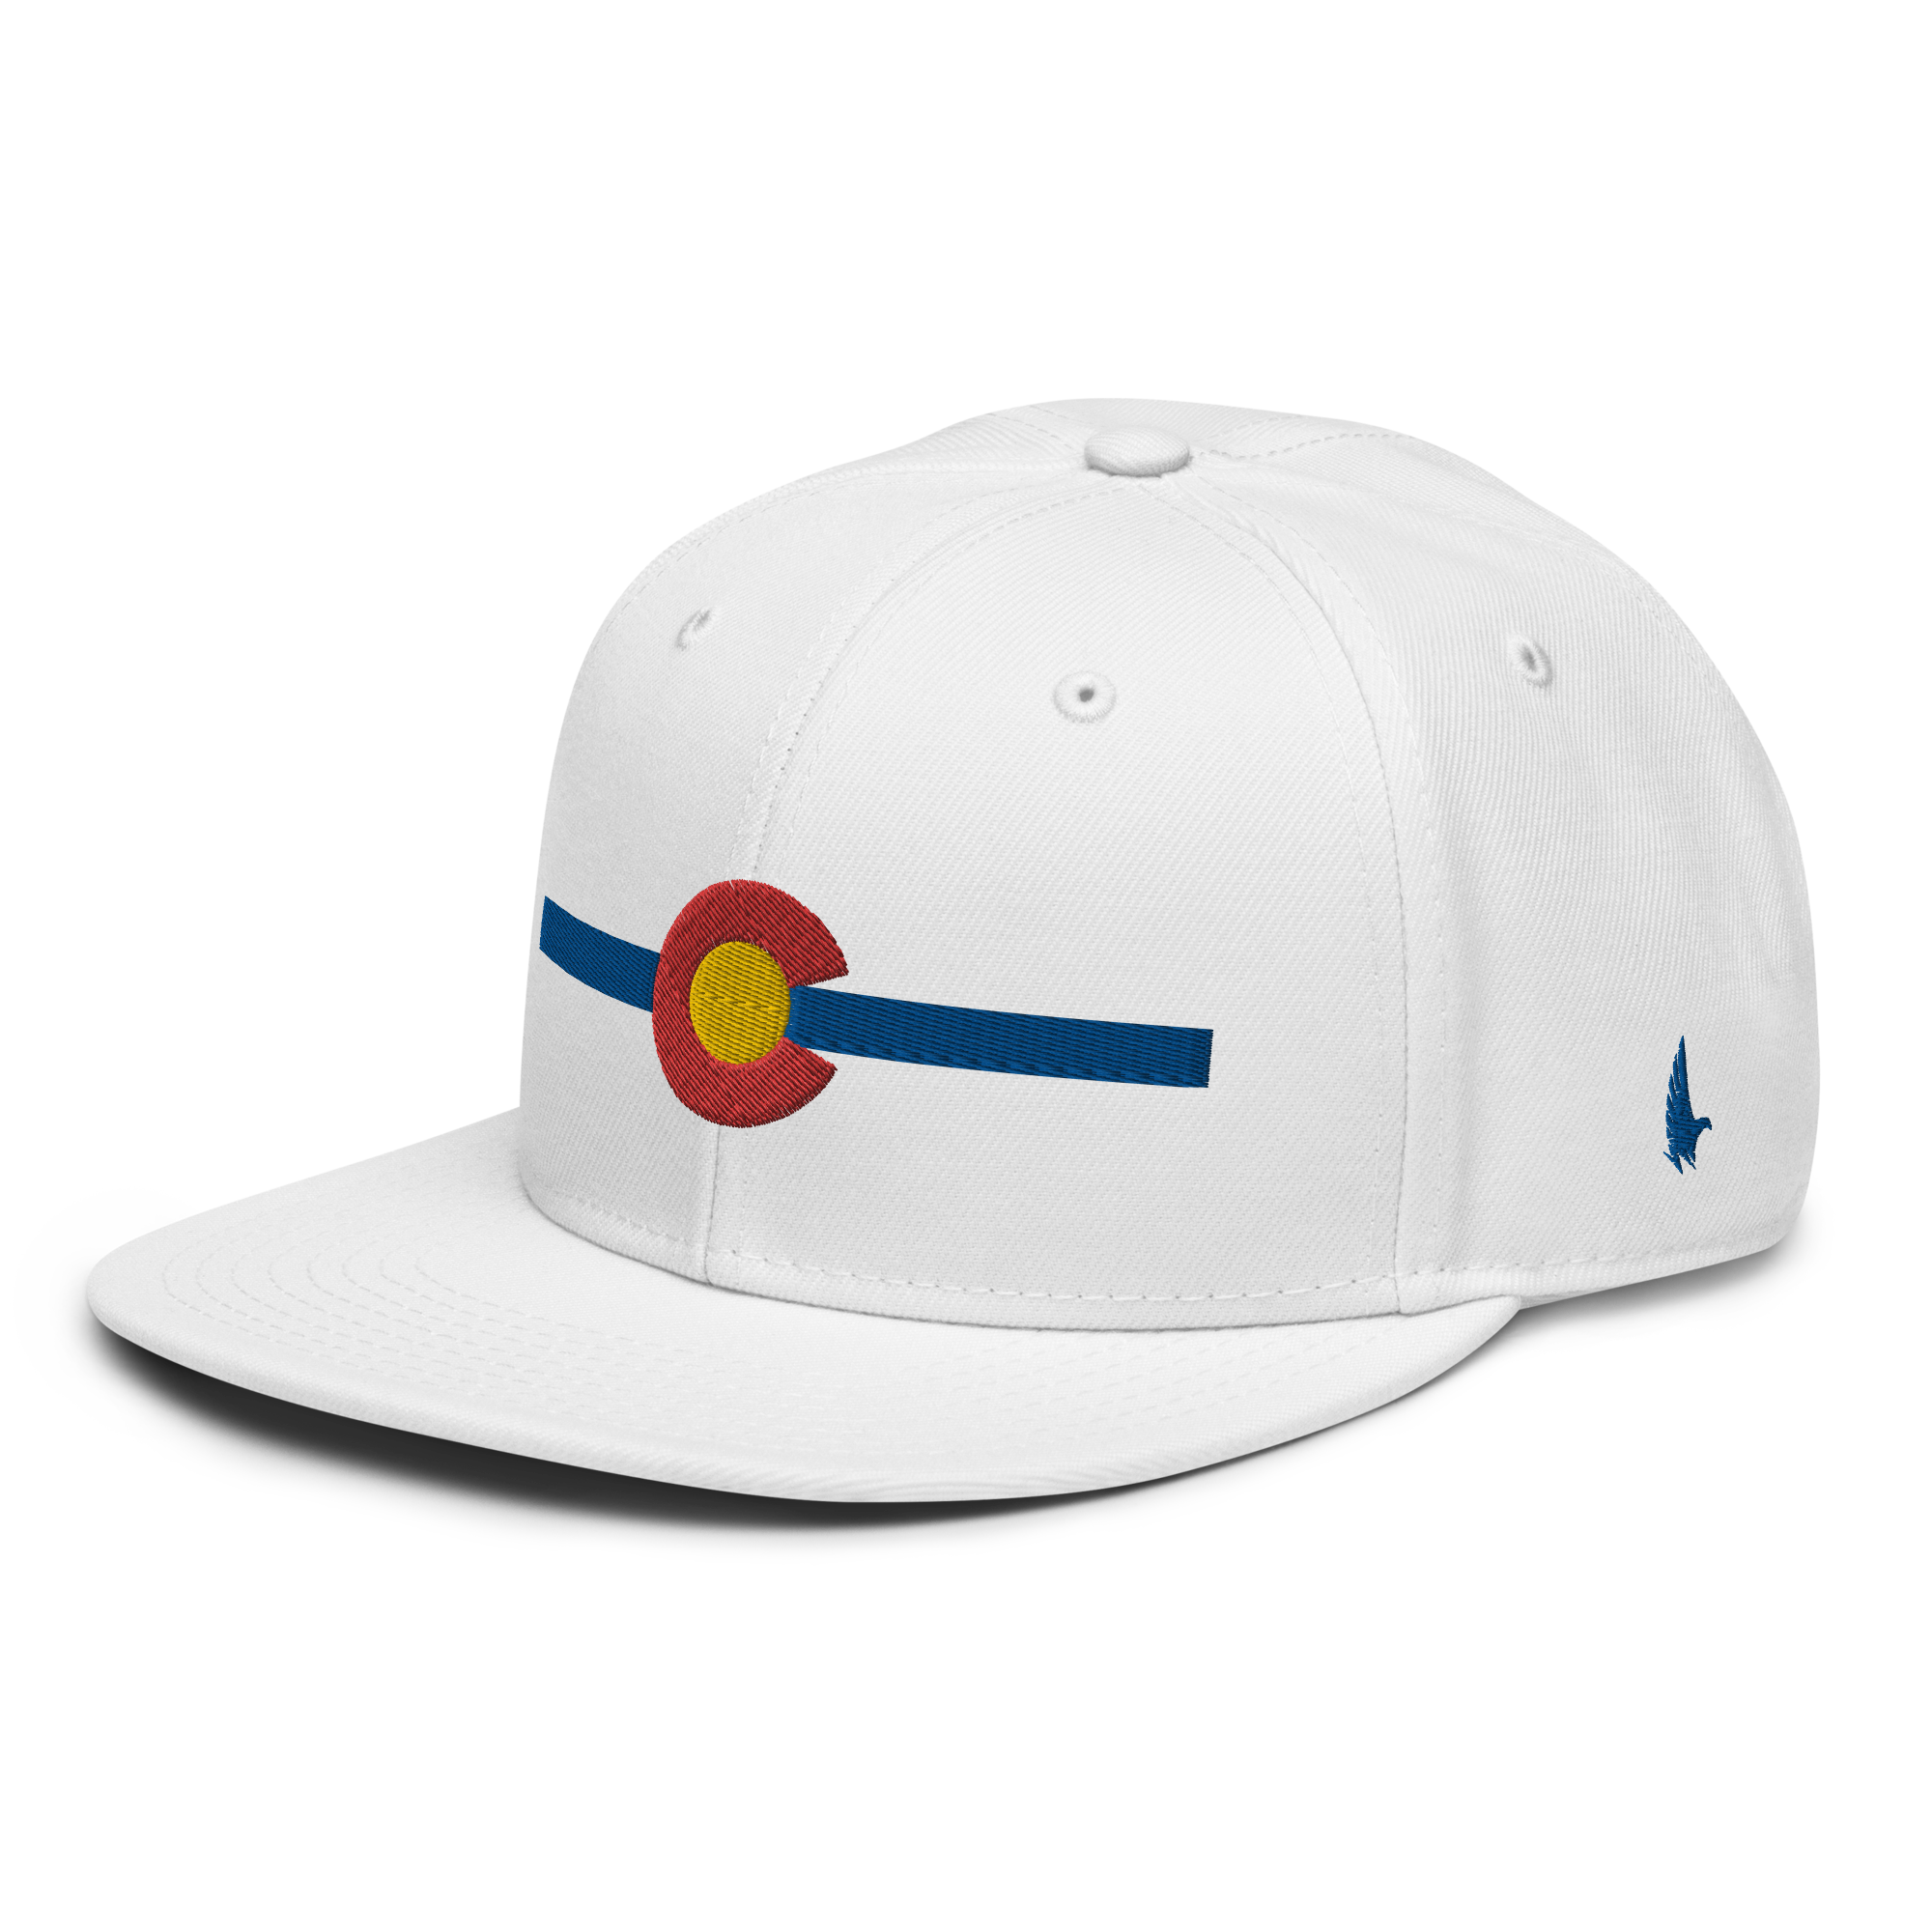 Classic Colorado Snapback Hat White/Blue OS - Loyalty Vibes